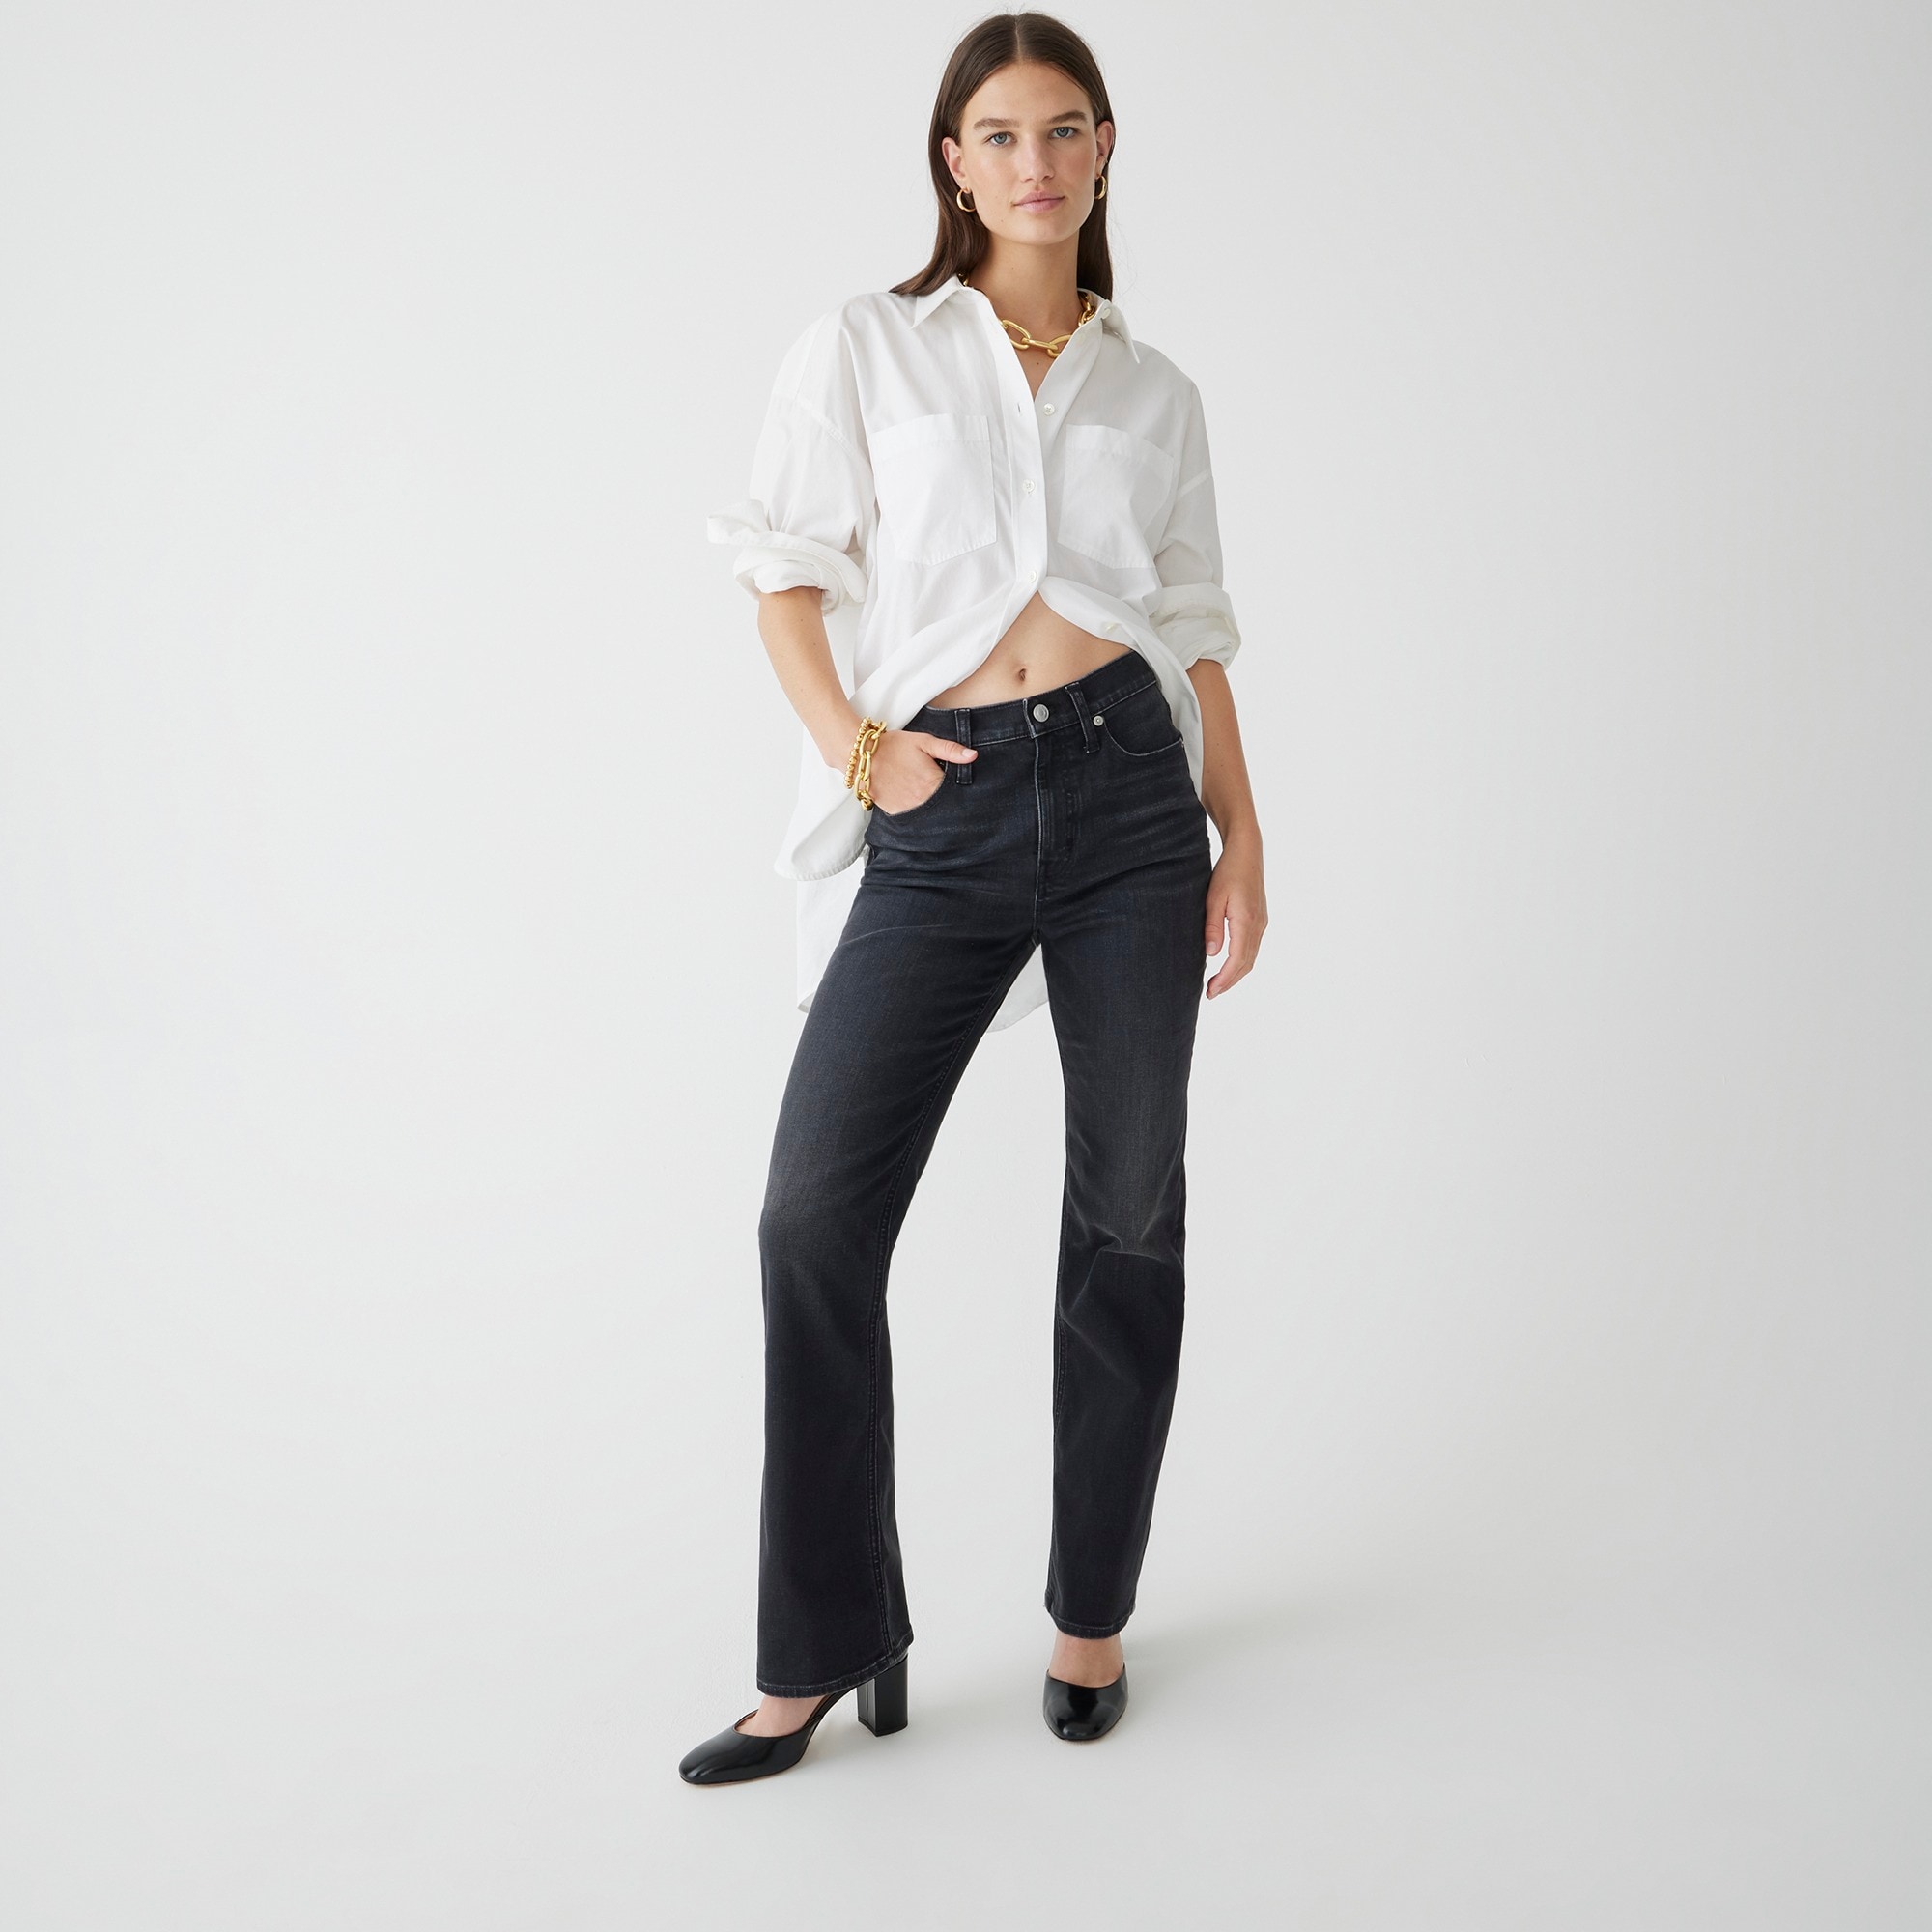 j.crew: high-rise slim demi-boot jean in charcoal wash for women